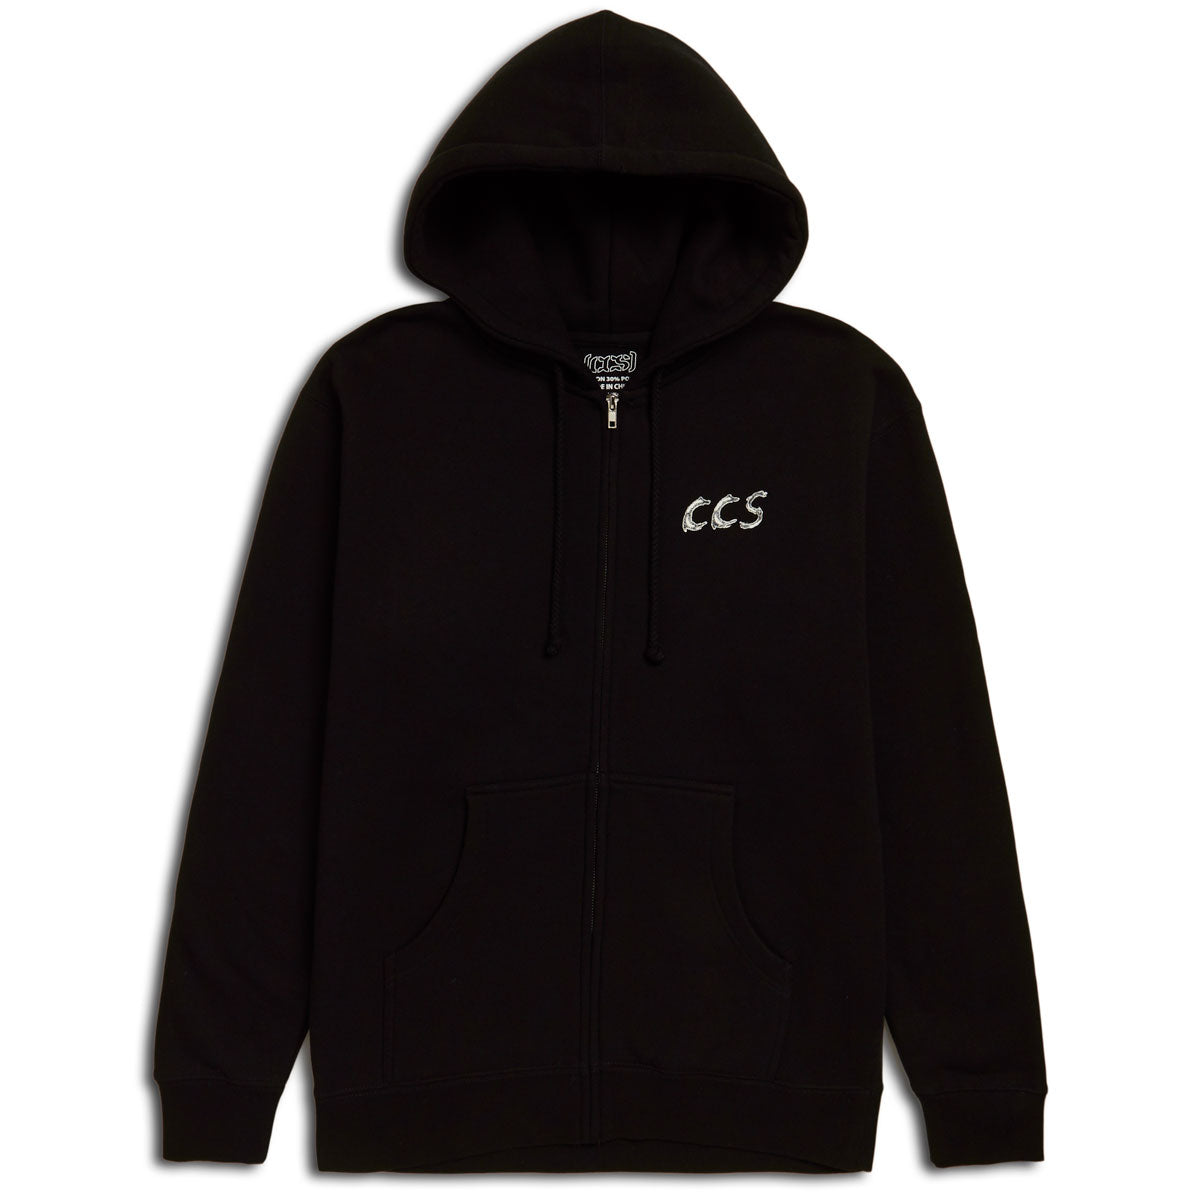 CCS Smile on the Surface Zip Hoodie - Black/White image 2